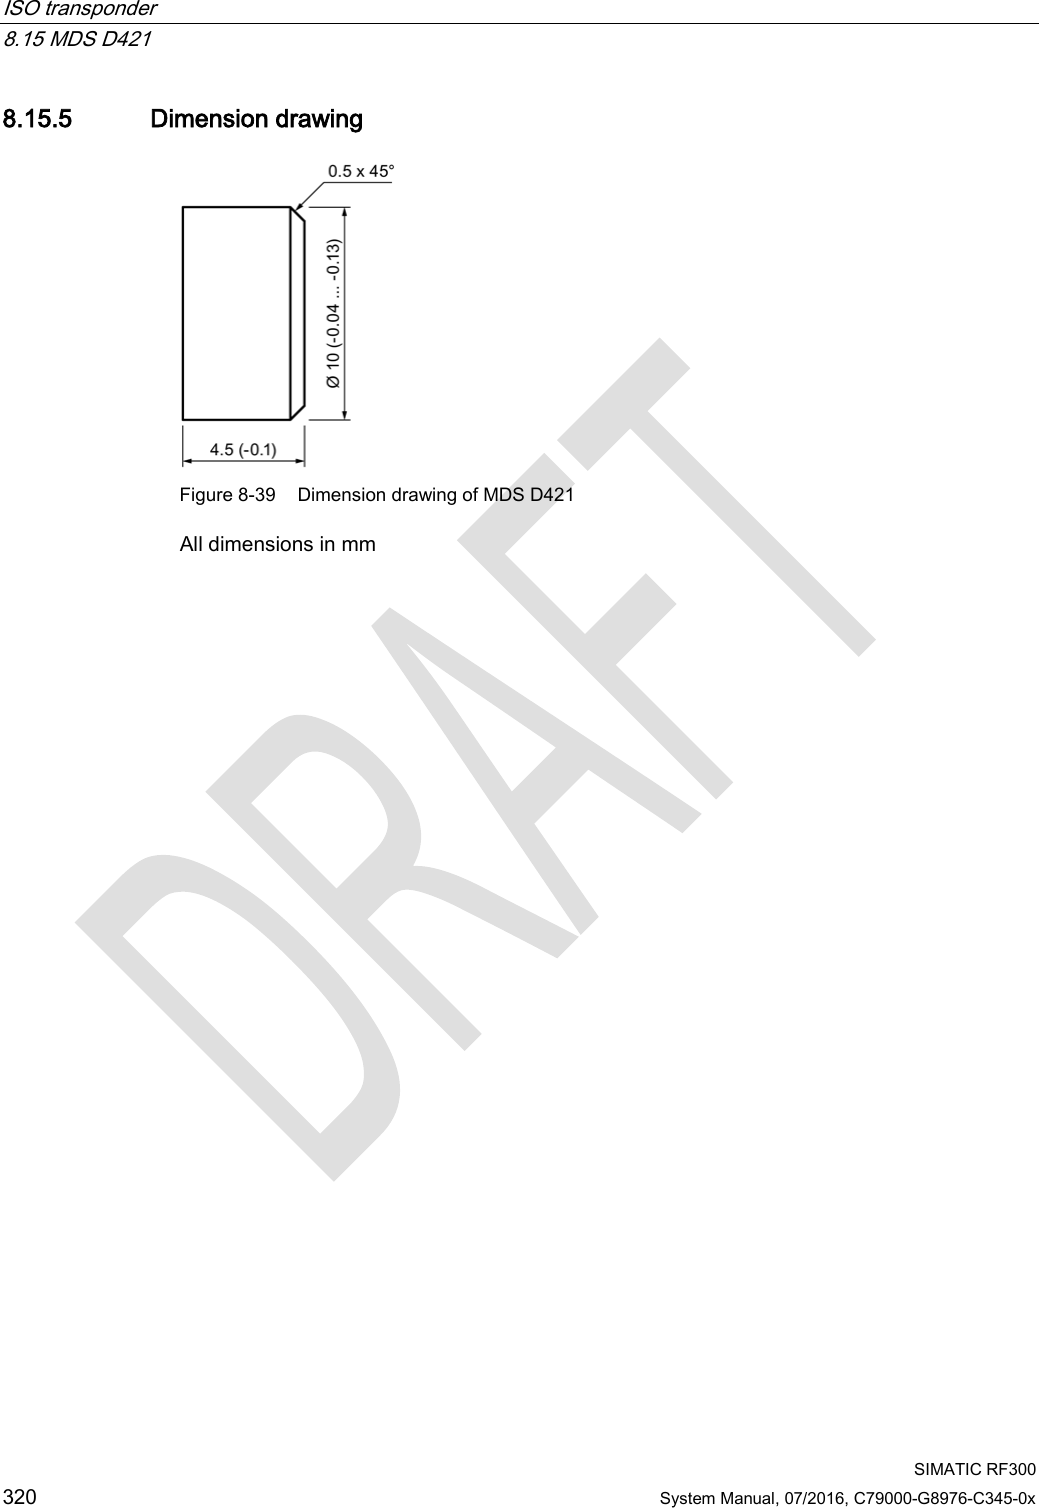 ISO transponder   8.15 MDS D421  SIMATIC RF300 320 System Manual, 07/2016, C79000-G8976-C345-0x 8.15.5 Dimension drawing  Figure 8-39 Dimension drawing of MDS D421 All dimensions in mm 